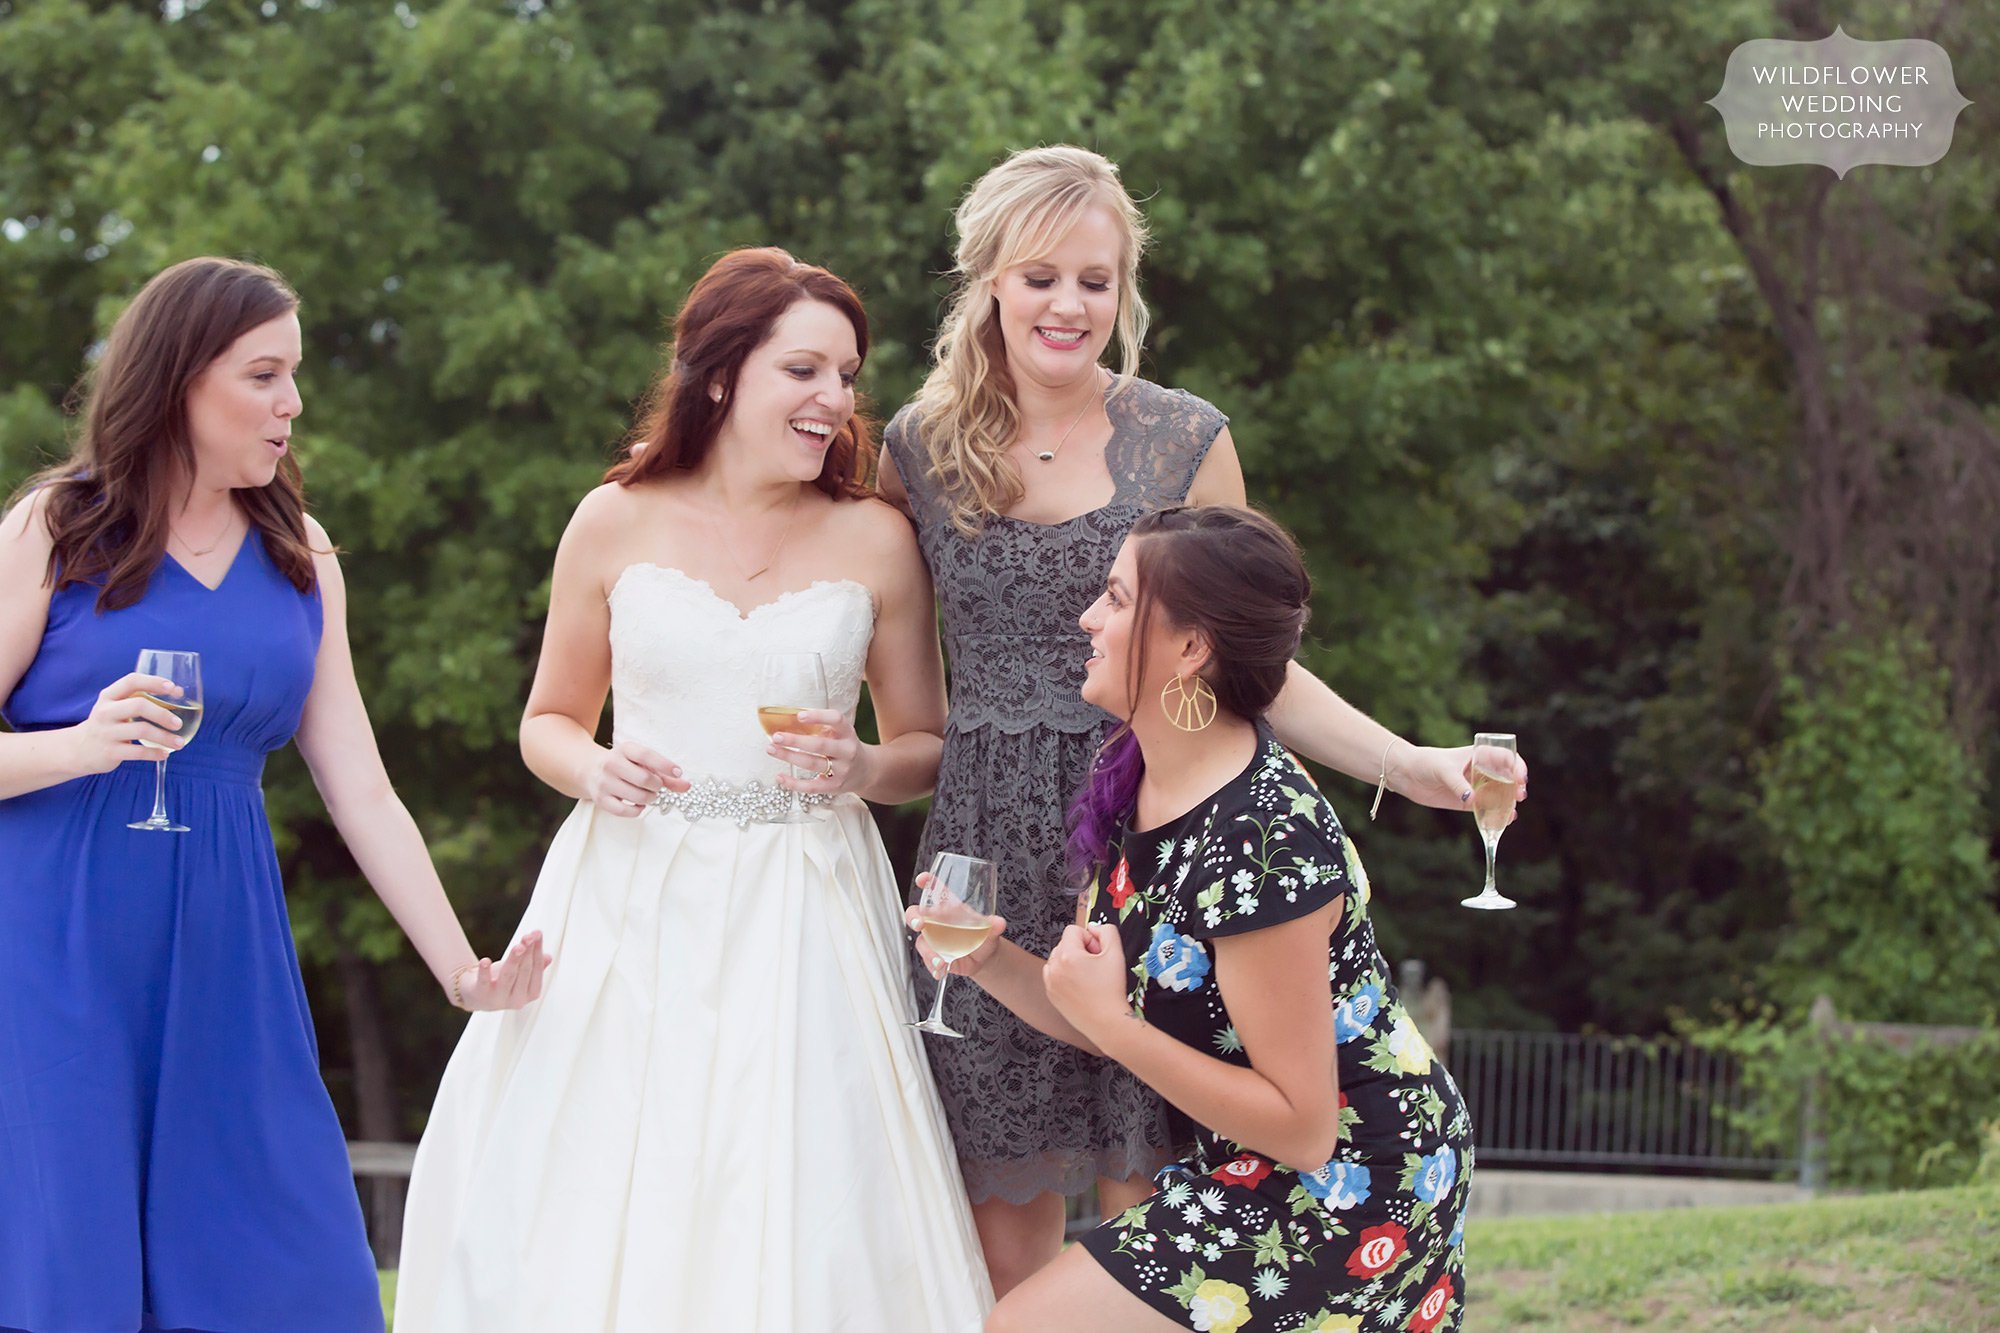 Funny photo of the bride with her friends at the Les Bourgeois Winery in Columbia, MO.